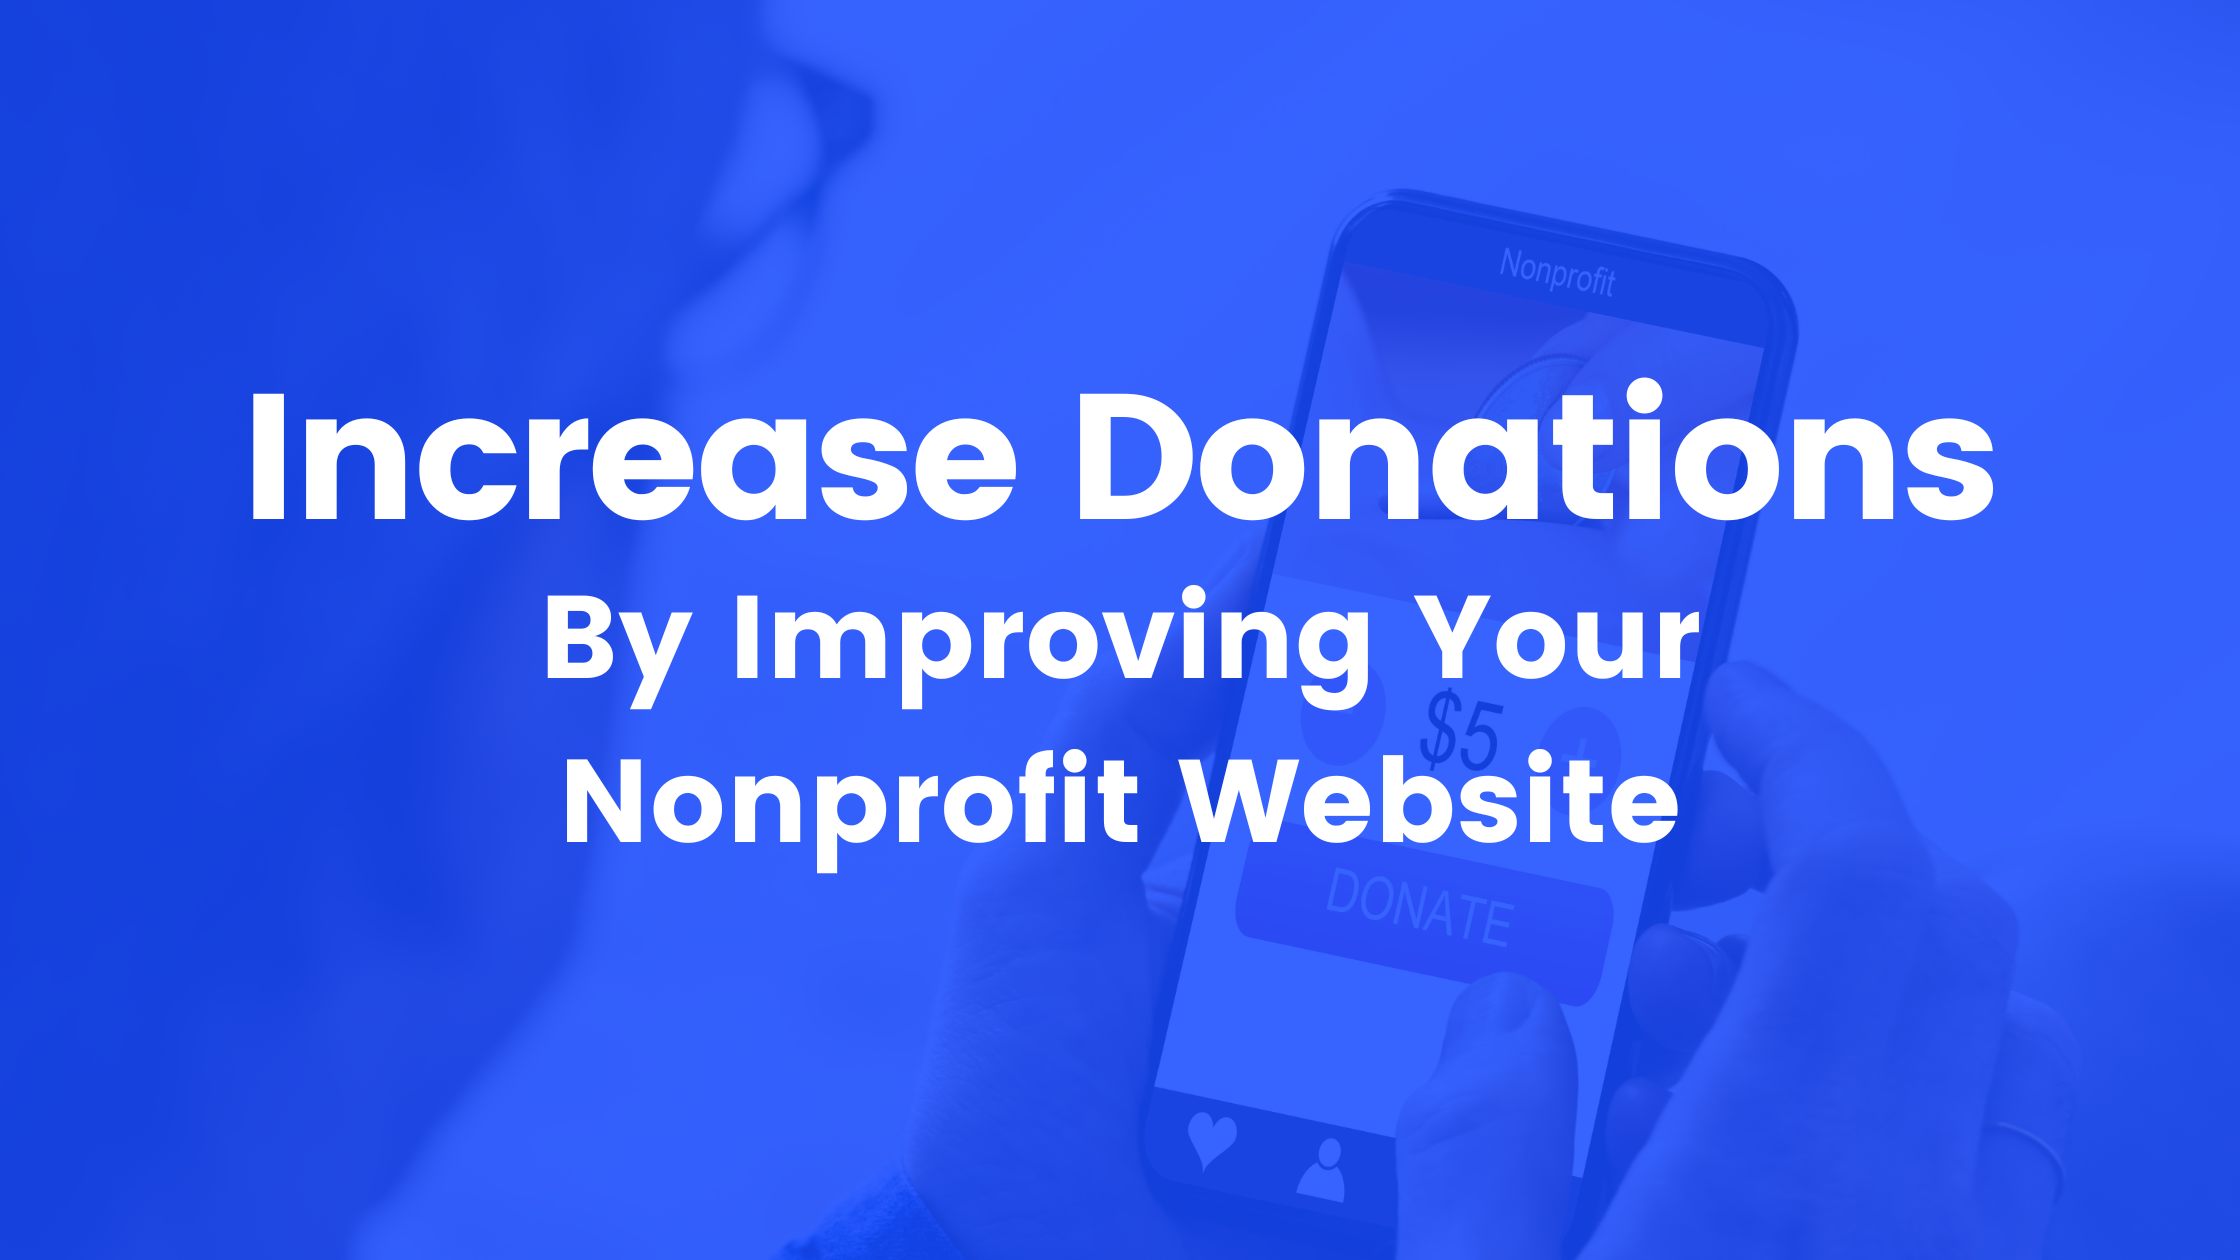 Increase Donations by improving your nonprofit website